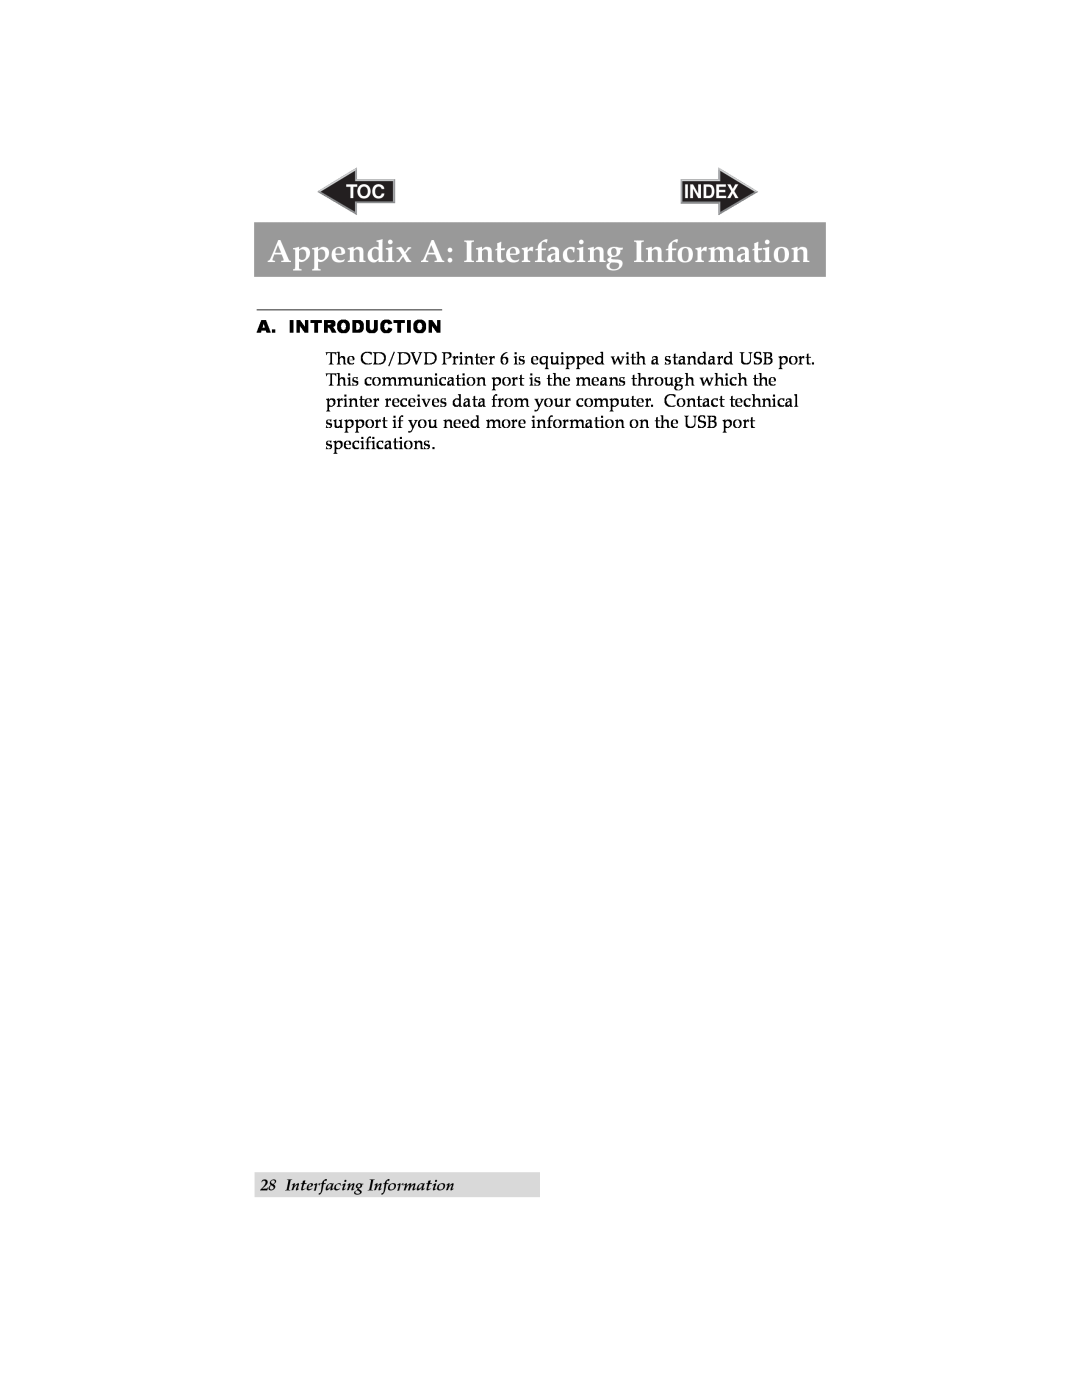 Primera Technology 6 user manual Appendix A Interfacing Information, Index, A. Introduction 